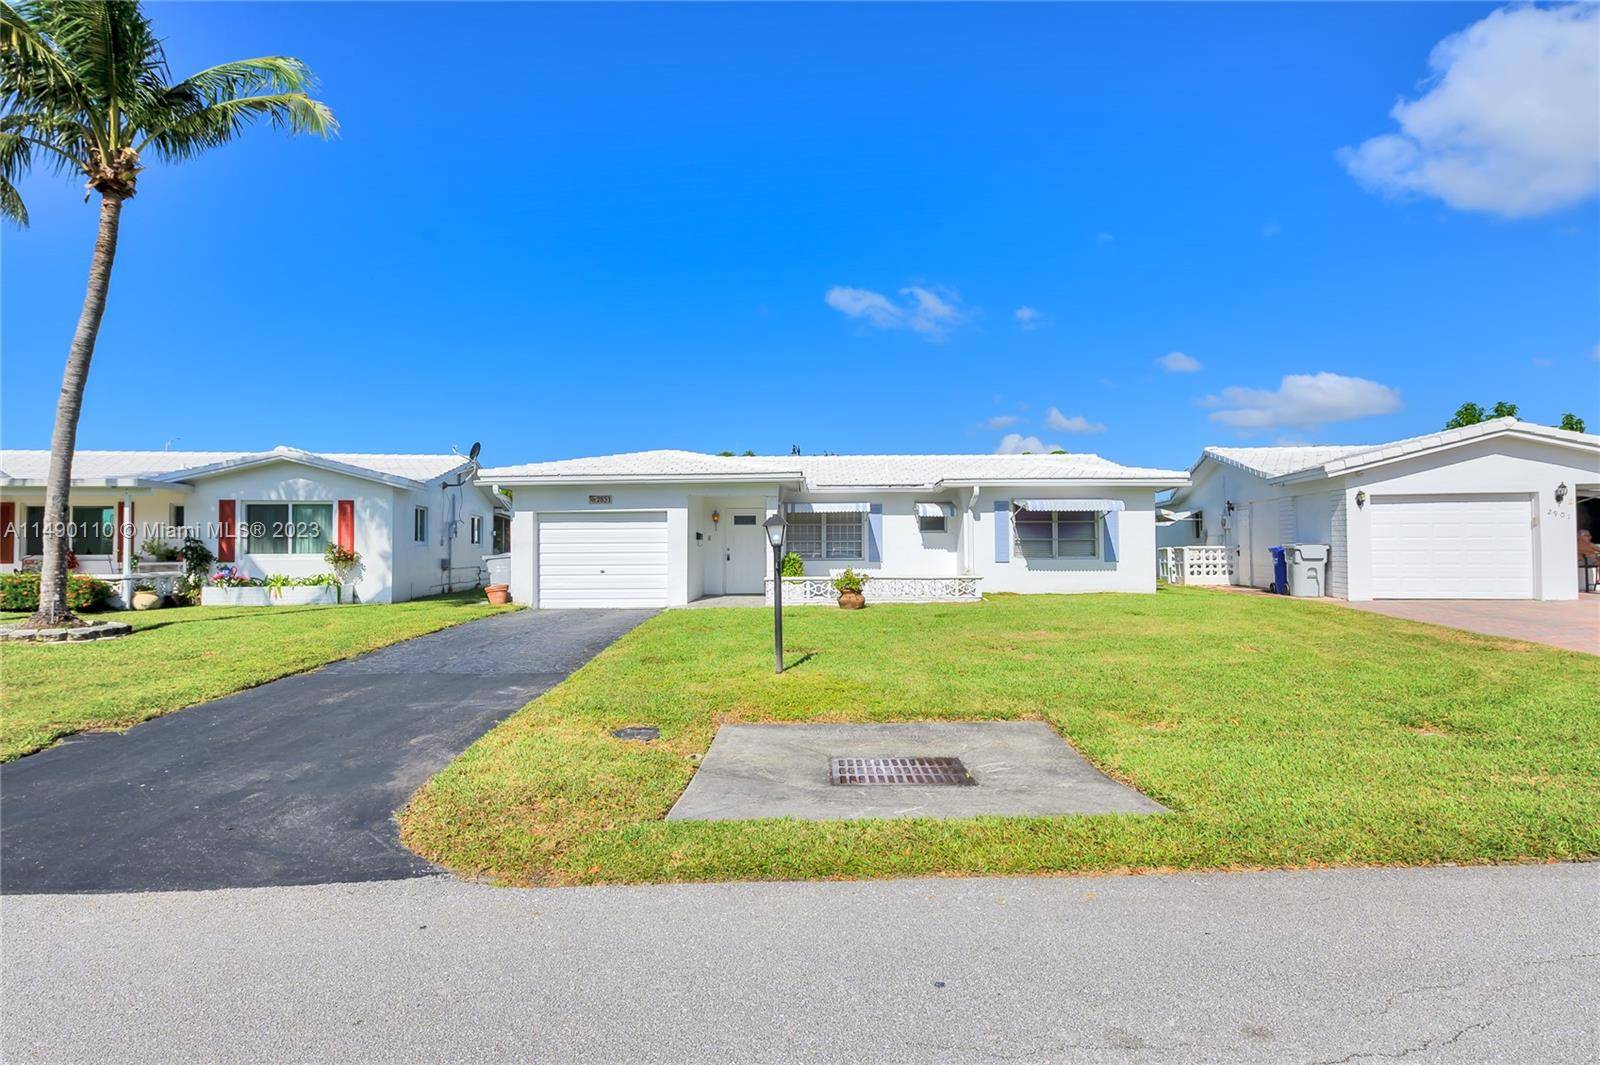 Here's your chance to own a beautiful and cozy home in Leisureville, a 55 community located less than 10 minutes away from the beautiful beaches of Pompano.